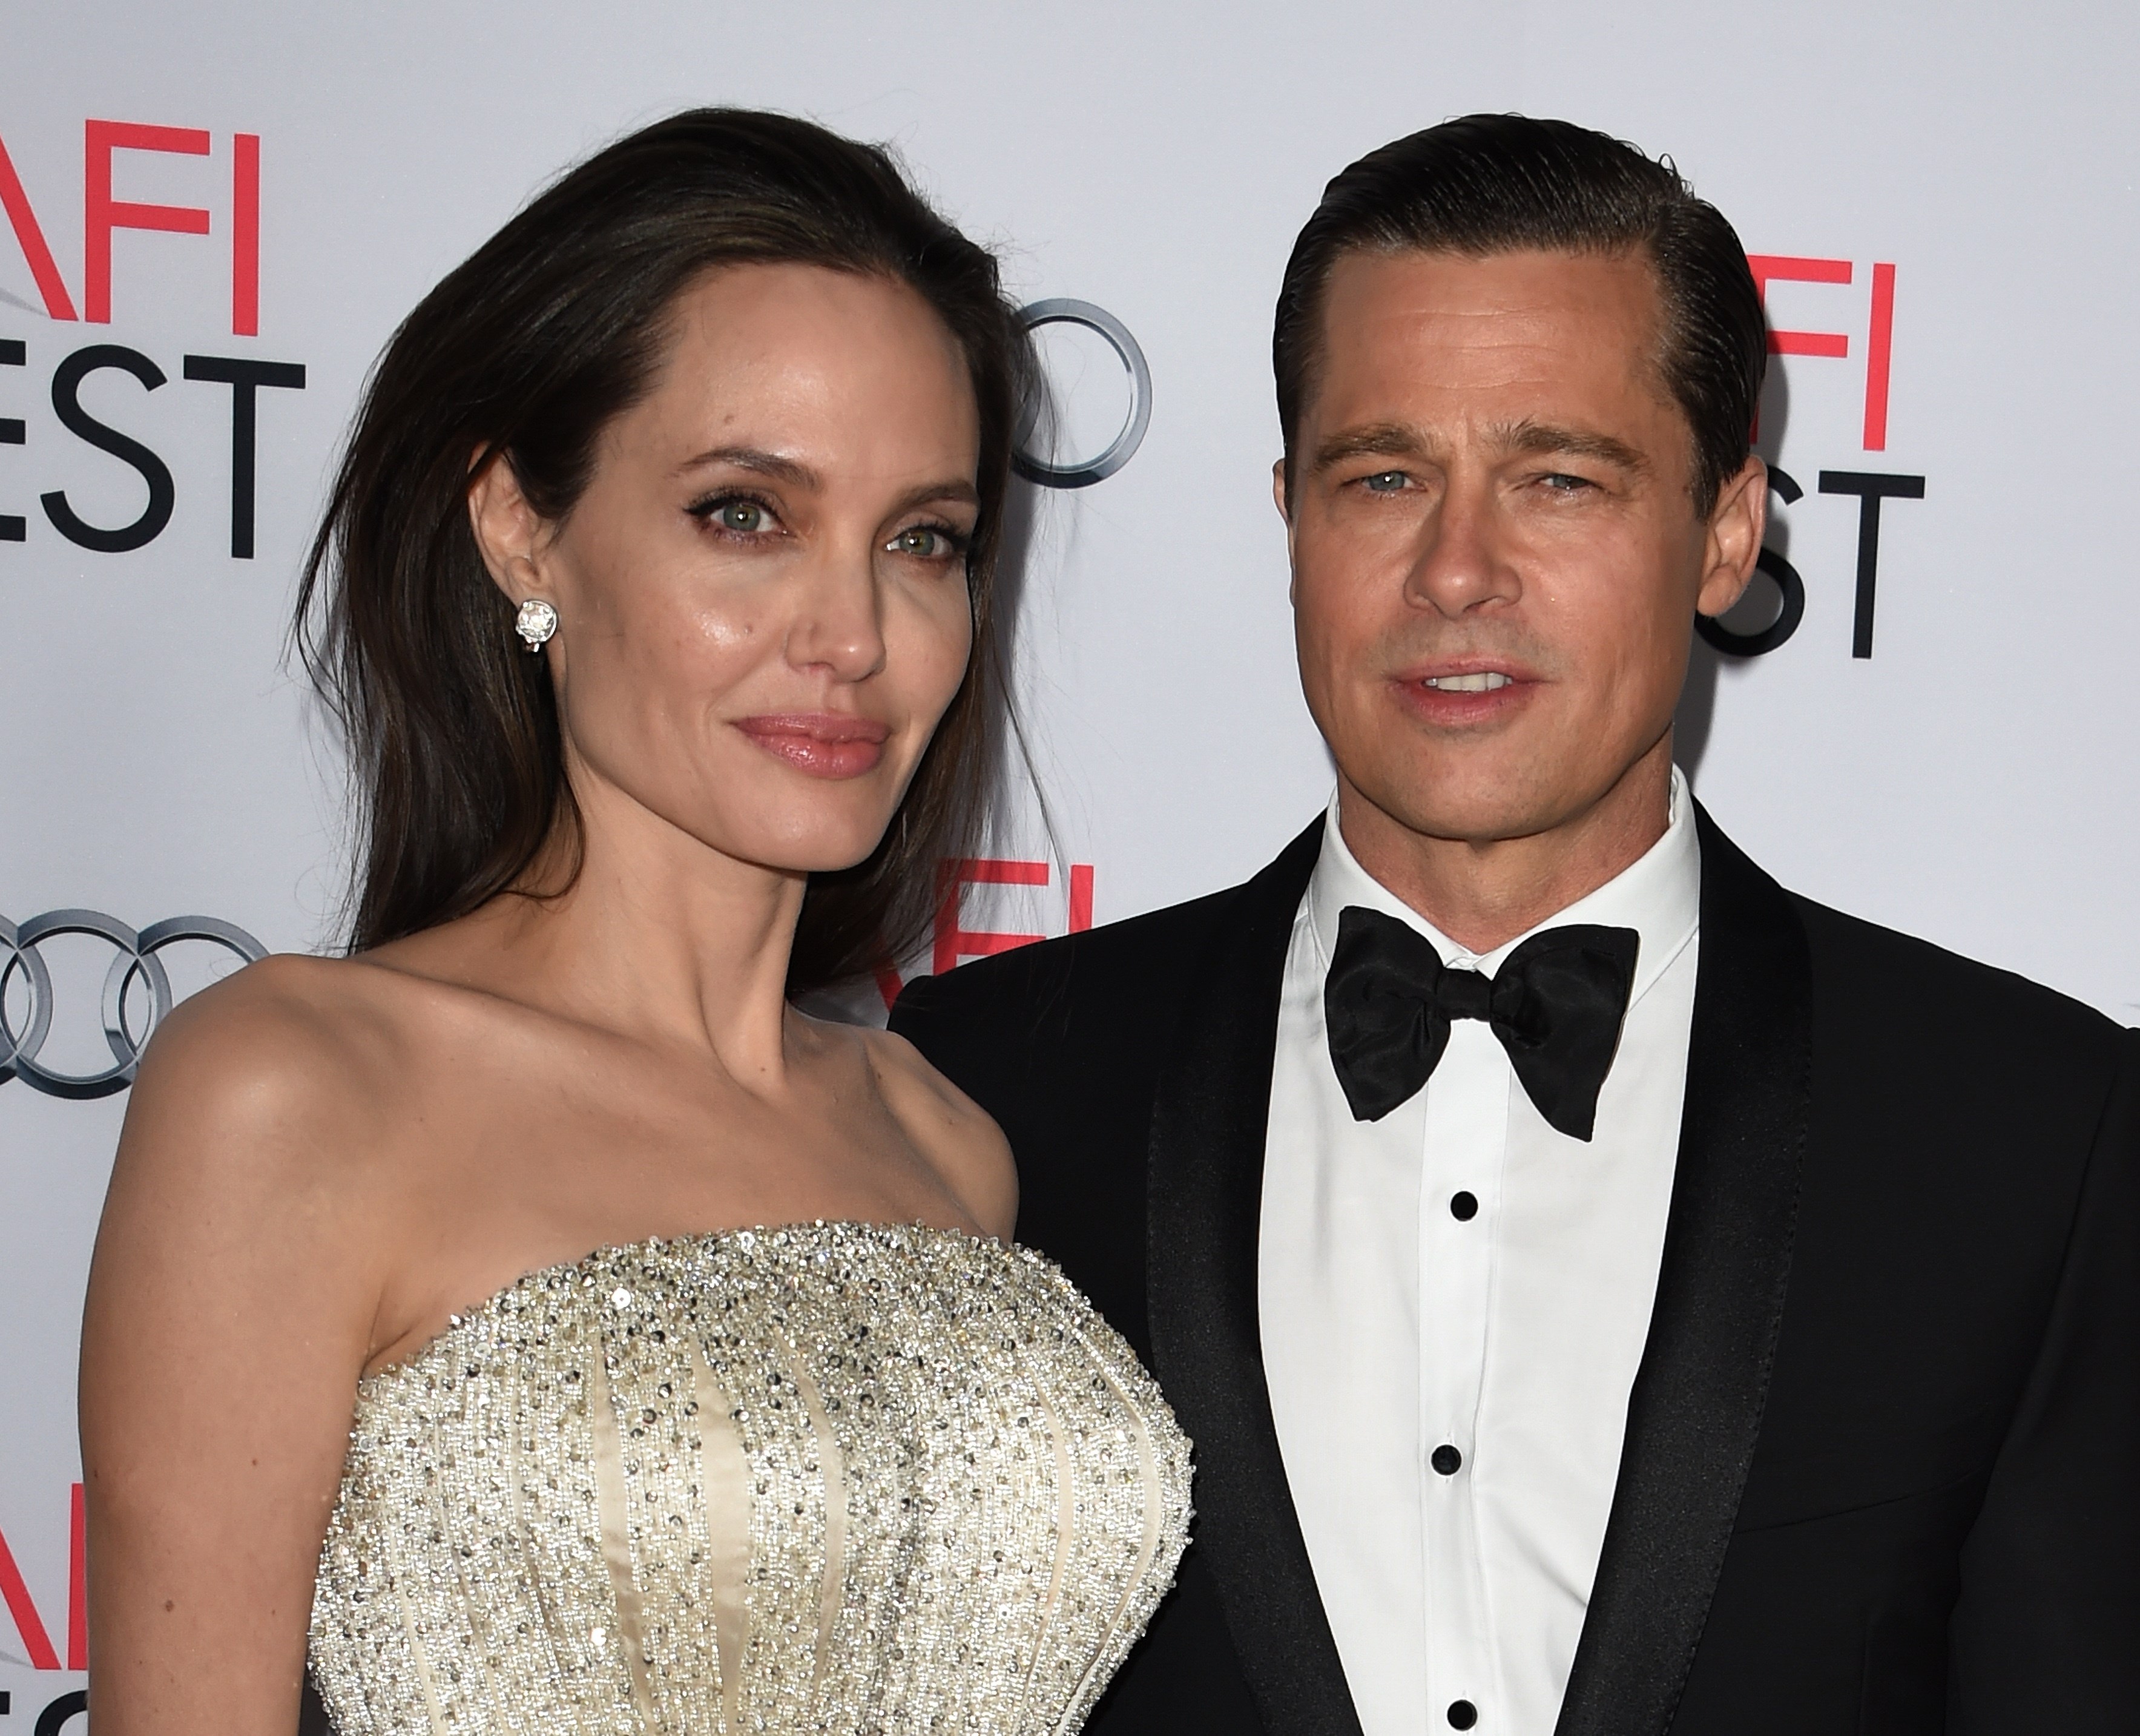 Writer-director-producer-actress Angelina Jolie Pitt (L) and actor-producer Brad Pitt arrive for the opening night gala premiere of Universal Pictures' 'By the Sea' during AFI FEST 2015 presented by Audi at the TCL Chinese Theatre in Hollywood, California on November 5, 2015.         AFP PHOTO / MARK RALSTON        (Photo credit should read MARK RALSTON/AFP/Getty Images)